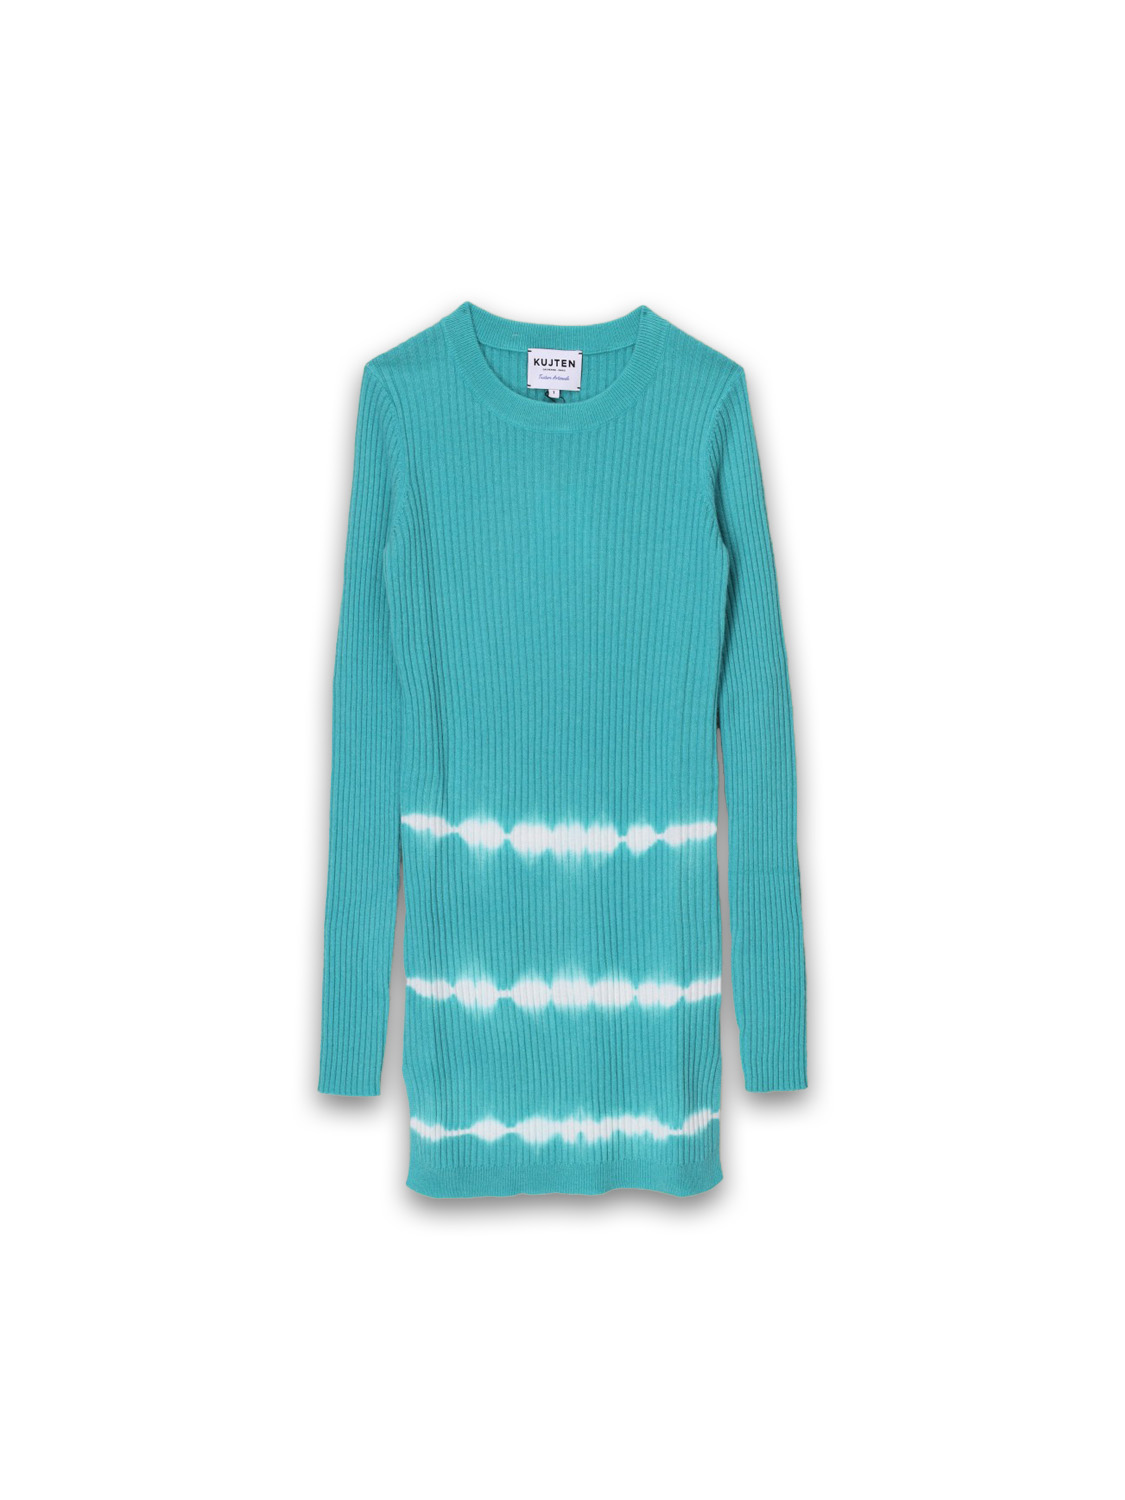 Kujten Bibili – Long ribbed cashmere sweater with tie-dye details  mint M/L